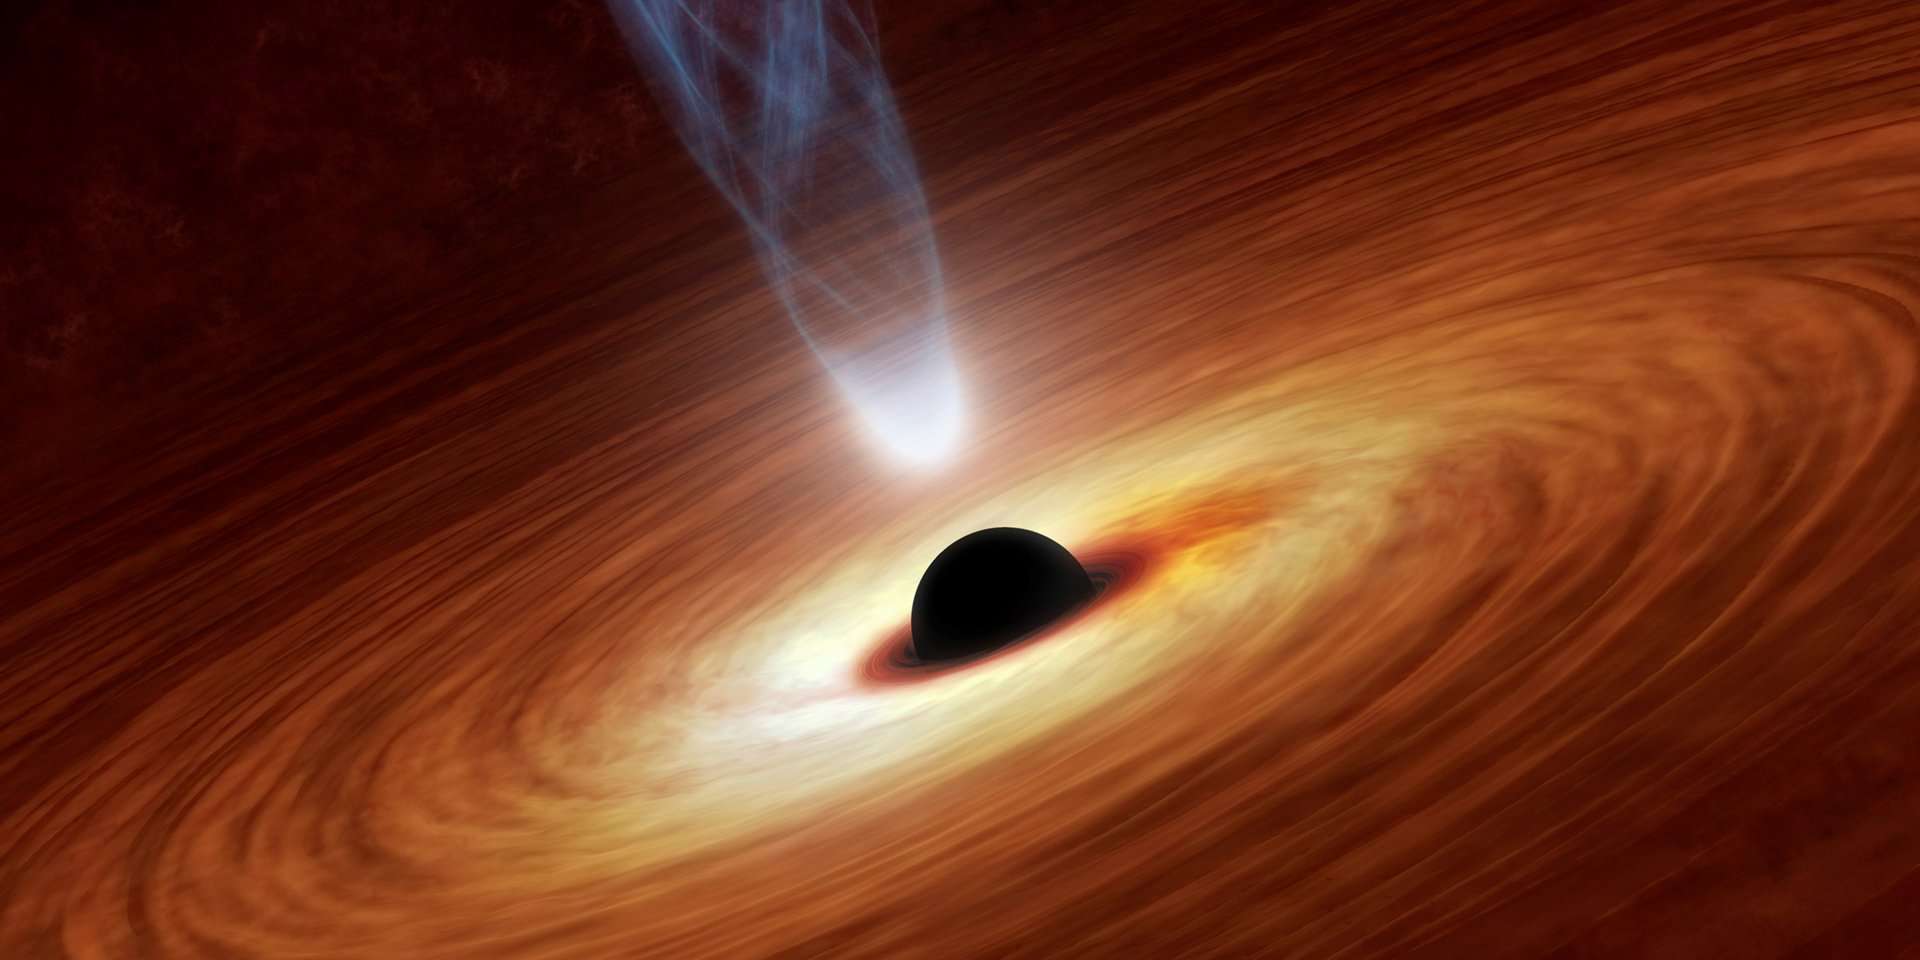 Taboola Ad Example 67259 - Astronomers Just Captured The First Image Of A Black Hole. Here Are The Horrifying Things That Would Happen If You Fell Into One.